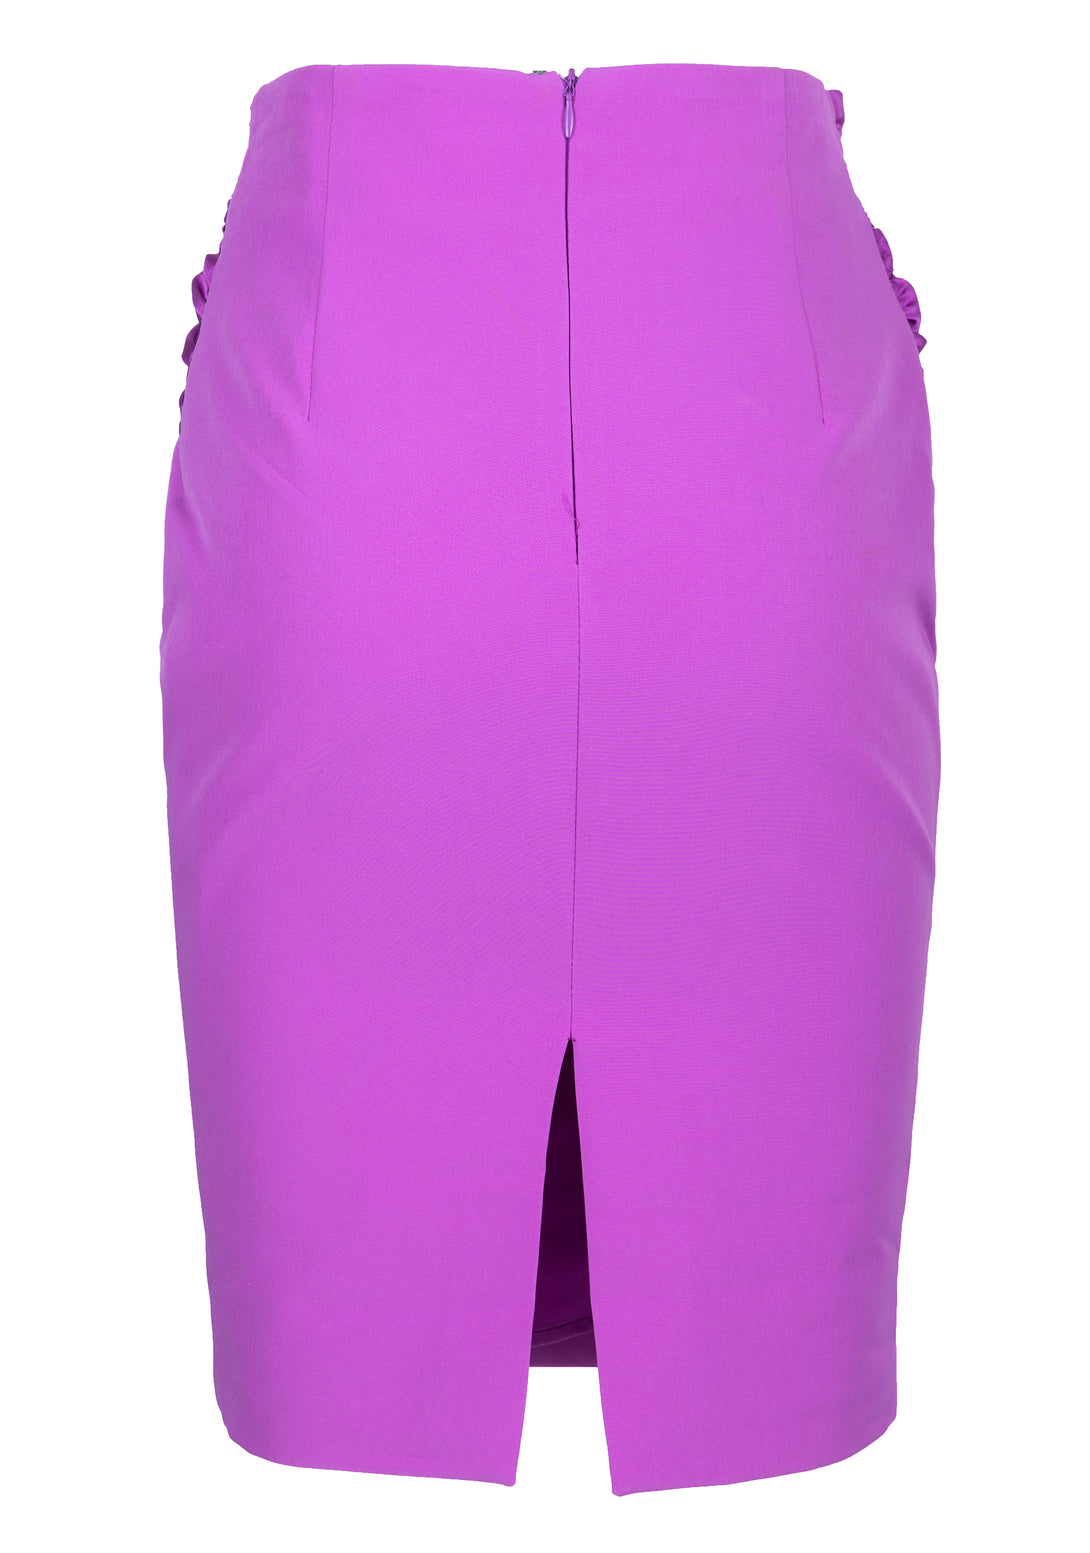 Sheath skirt slim fit made in technical fabric